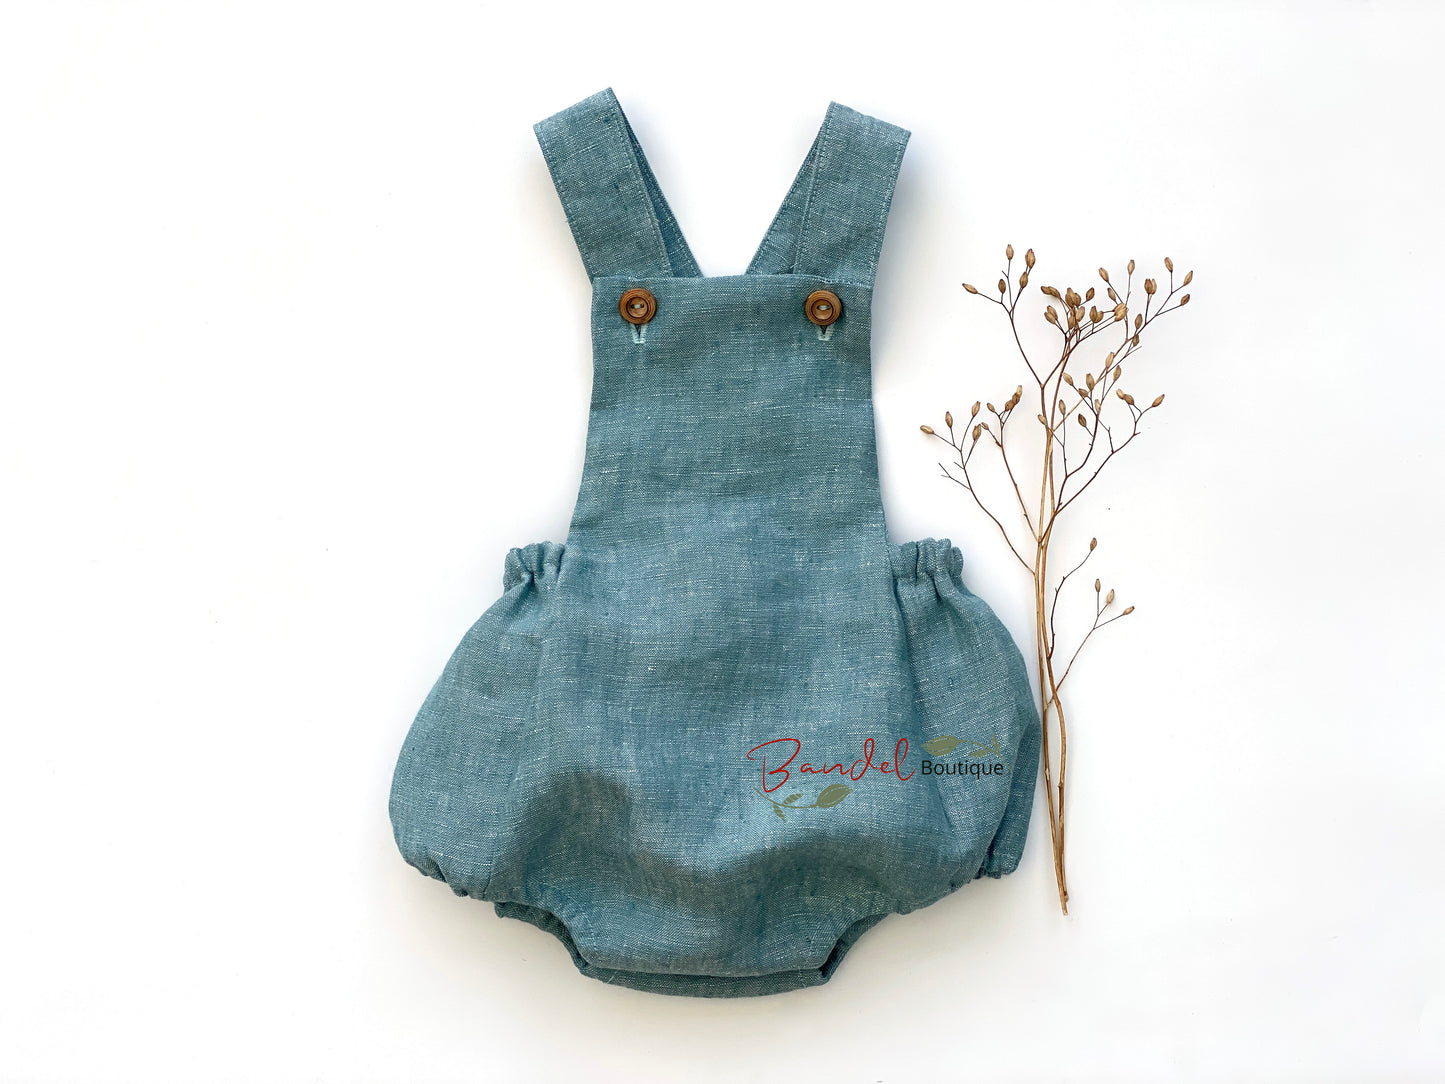 Mint Linen Baby Romper is the perfect eco-friendly addition to any baby's wardrobe. Crafted from sustainably-sourced linen and fastened with a stylish wooden button, this romper offers a comfortable fit, thanks to the elastic back waistband and leg openings. Perfect for playtime styling.